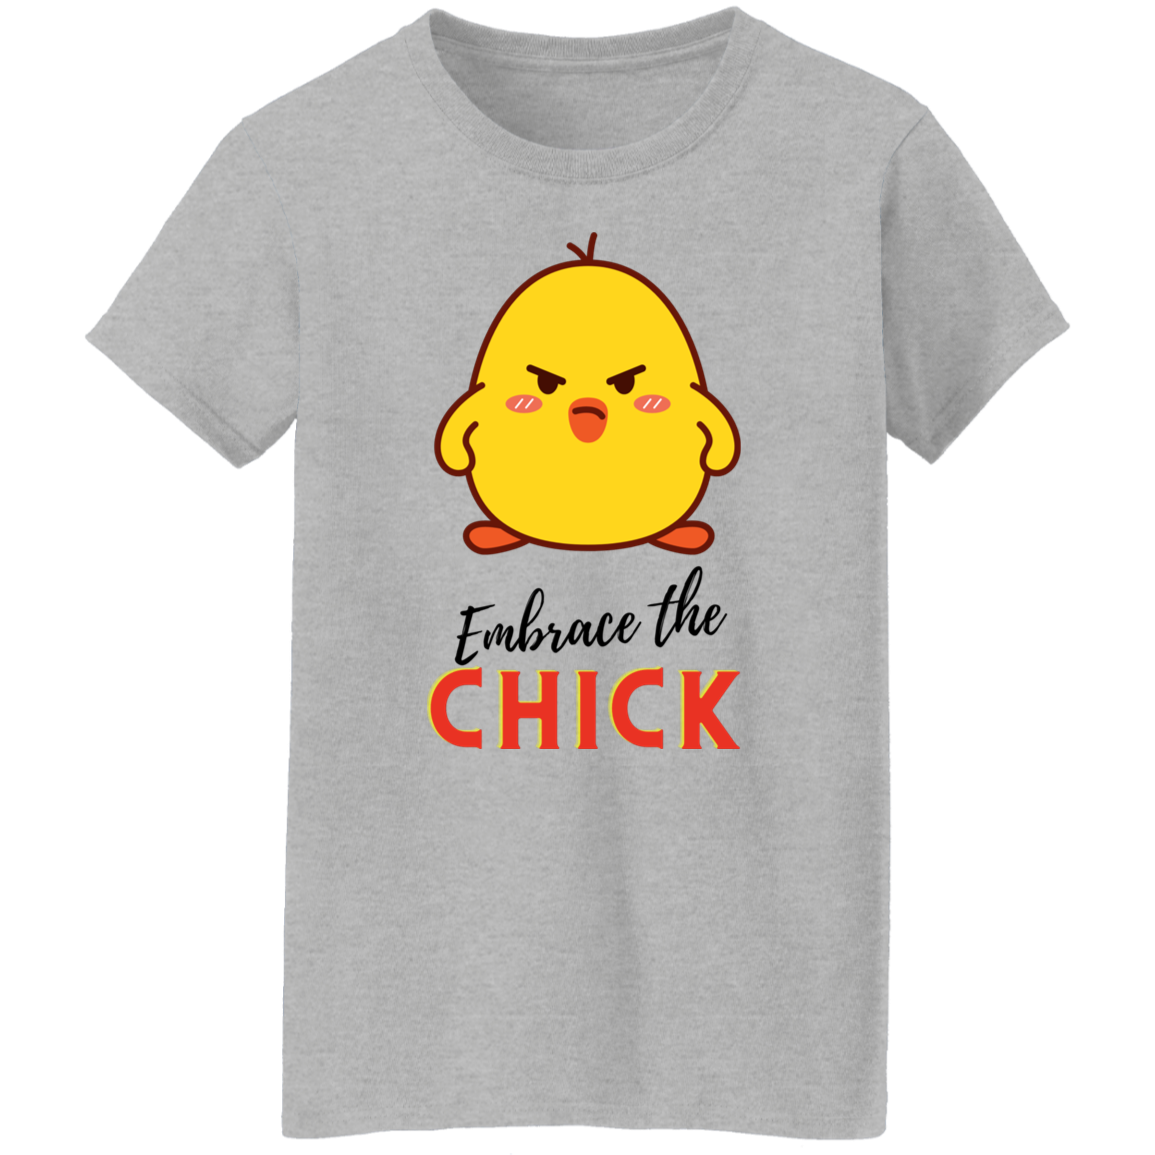 Embrace the Chick - Camiseta para mujer